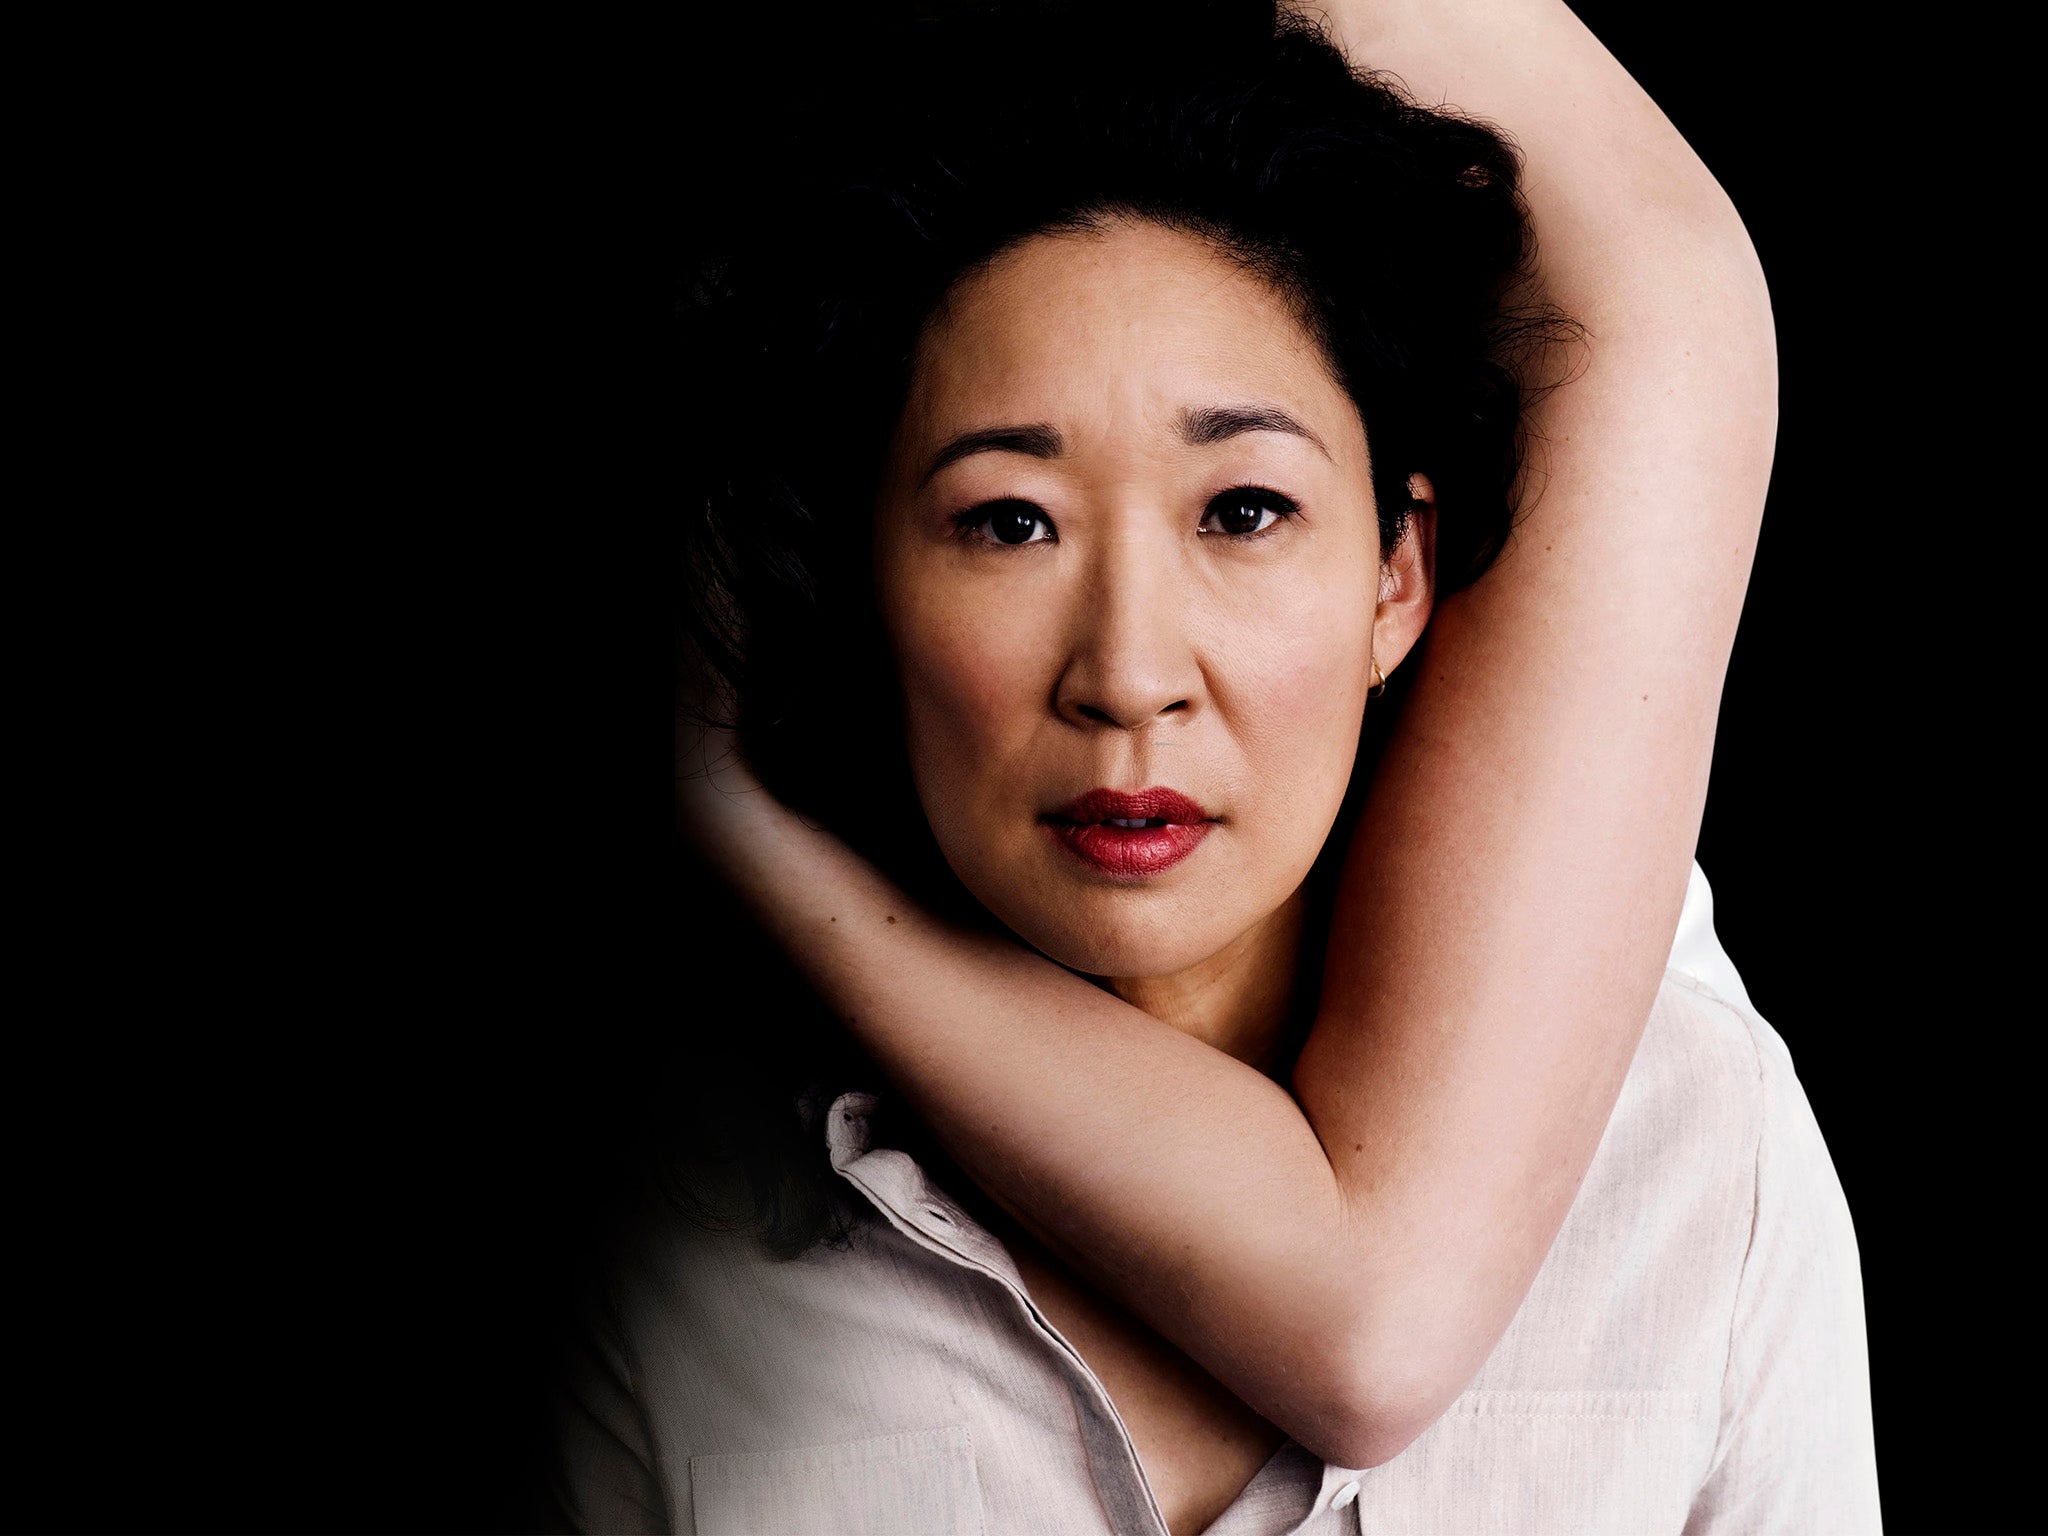 Best Performance by an Actress in a Television Series - Drama: Sandra Oh (Killing Eve)